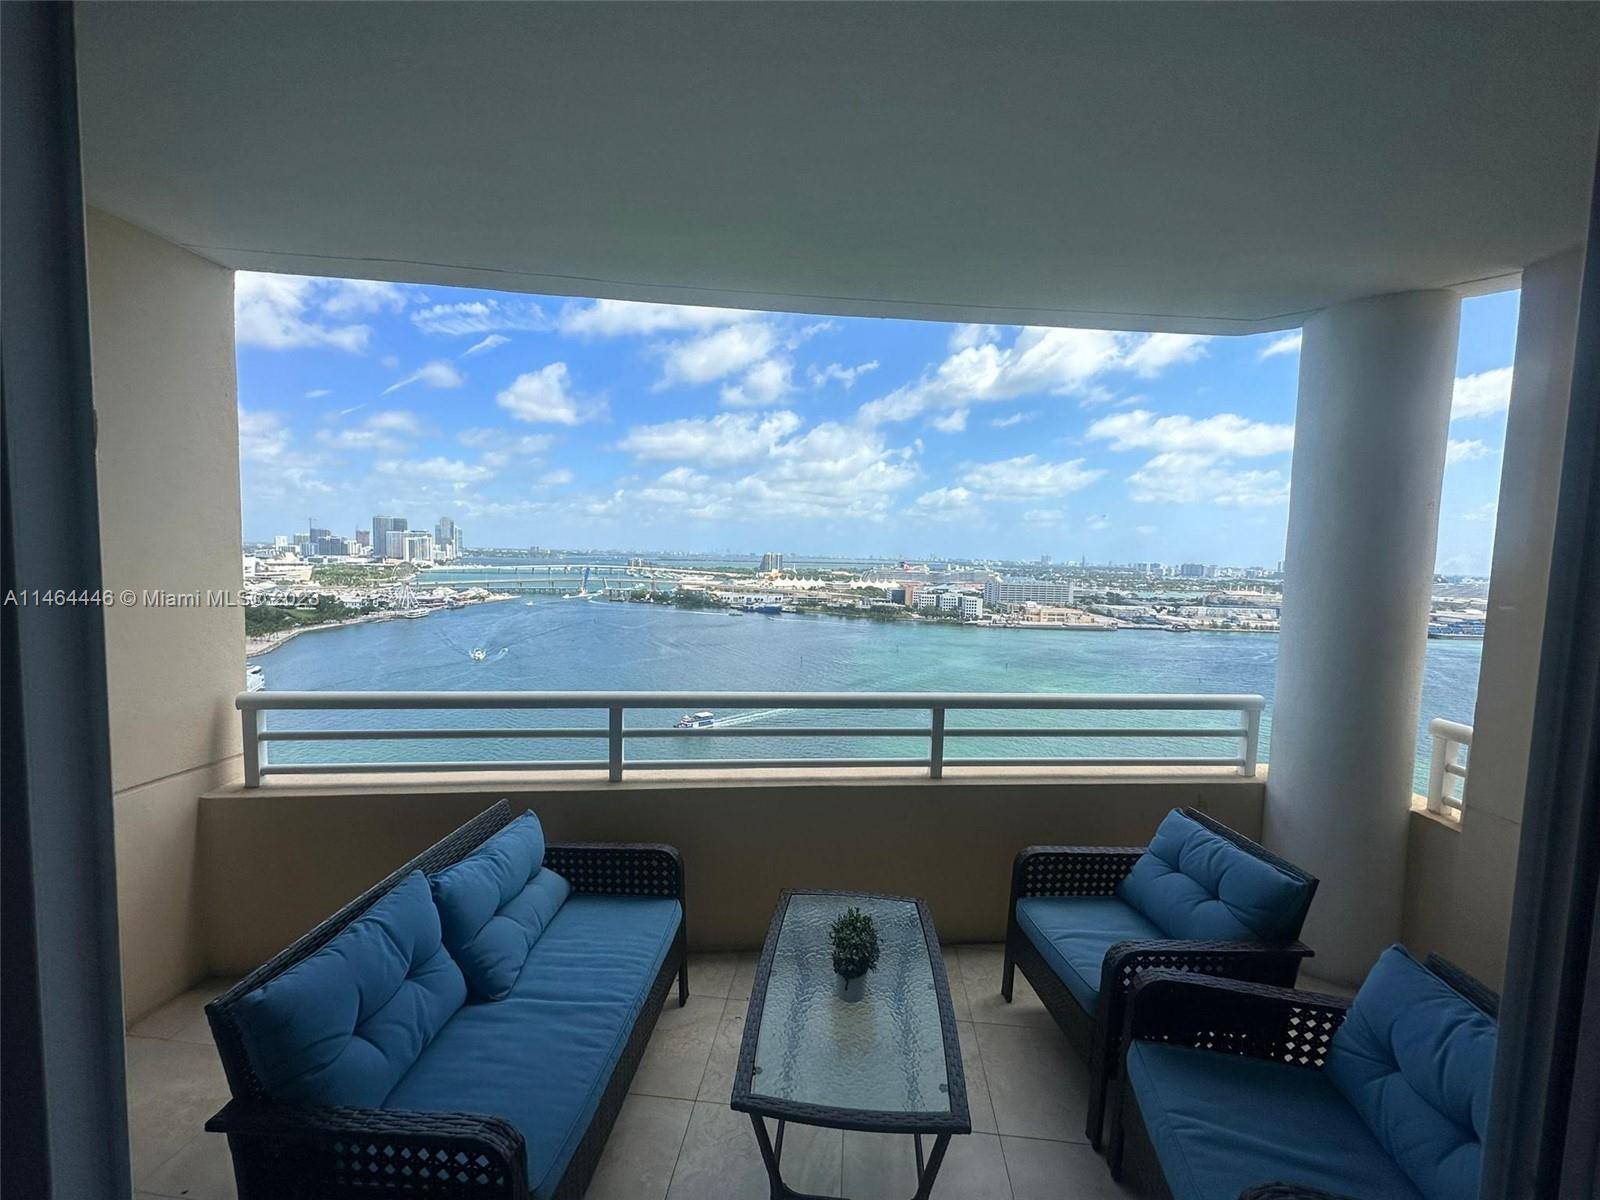 Show it with pride ! One of the best views on Brickell and Brickell Key.